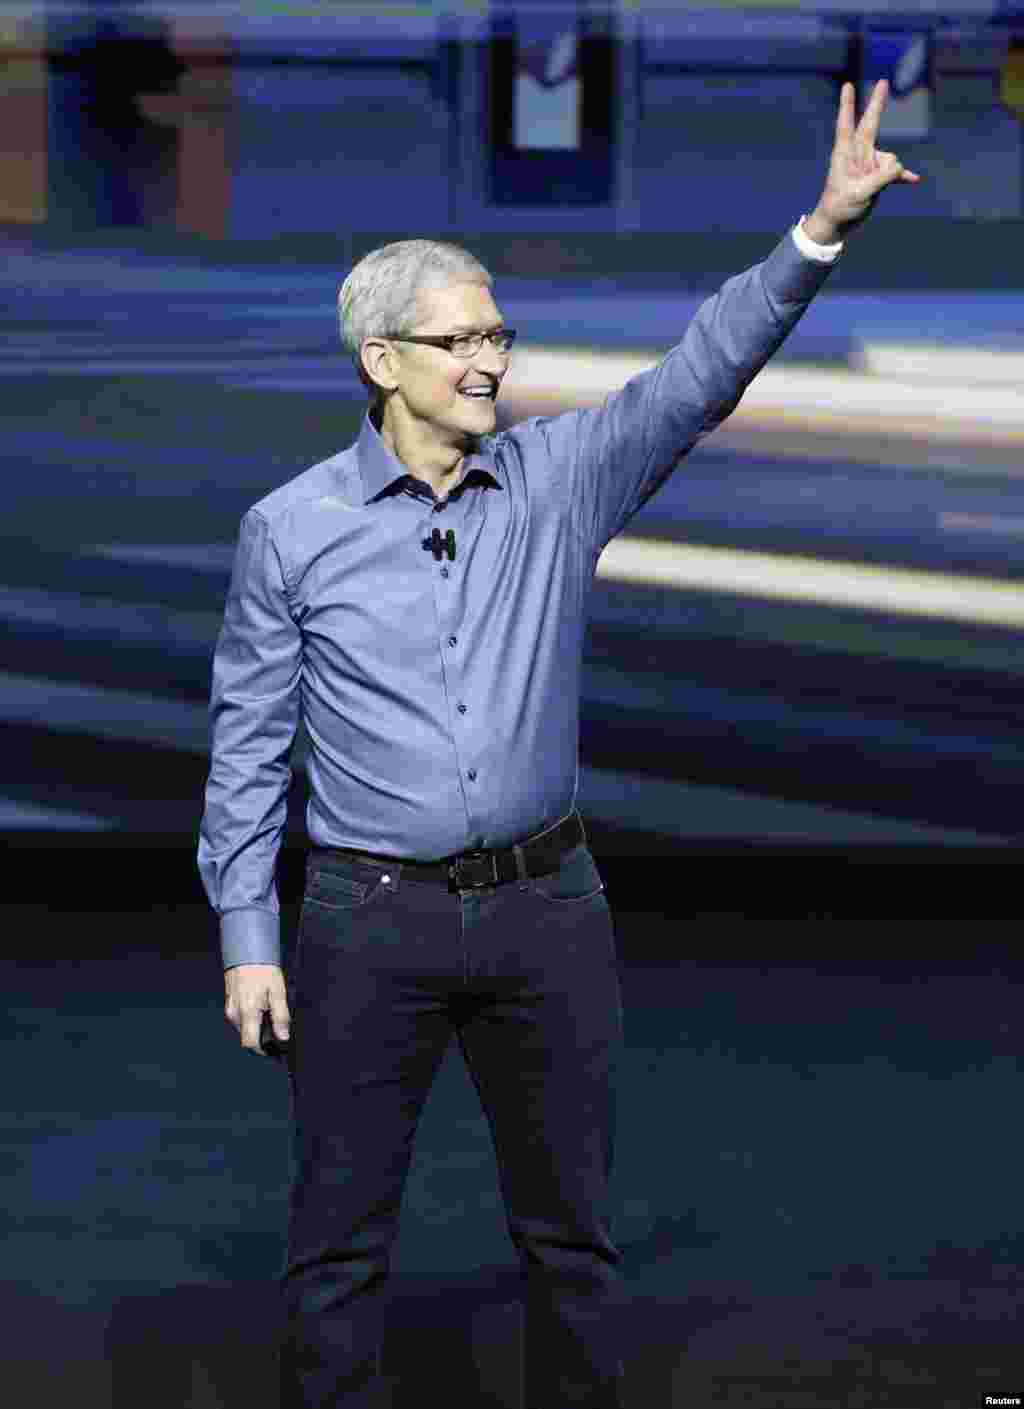 Apple CEO Tim Cook greets the crowd during an Apple media event in San Francisco, California.